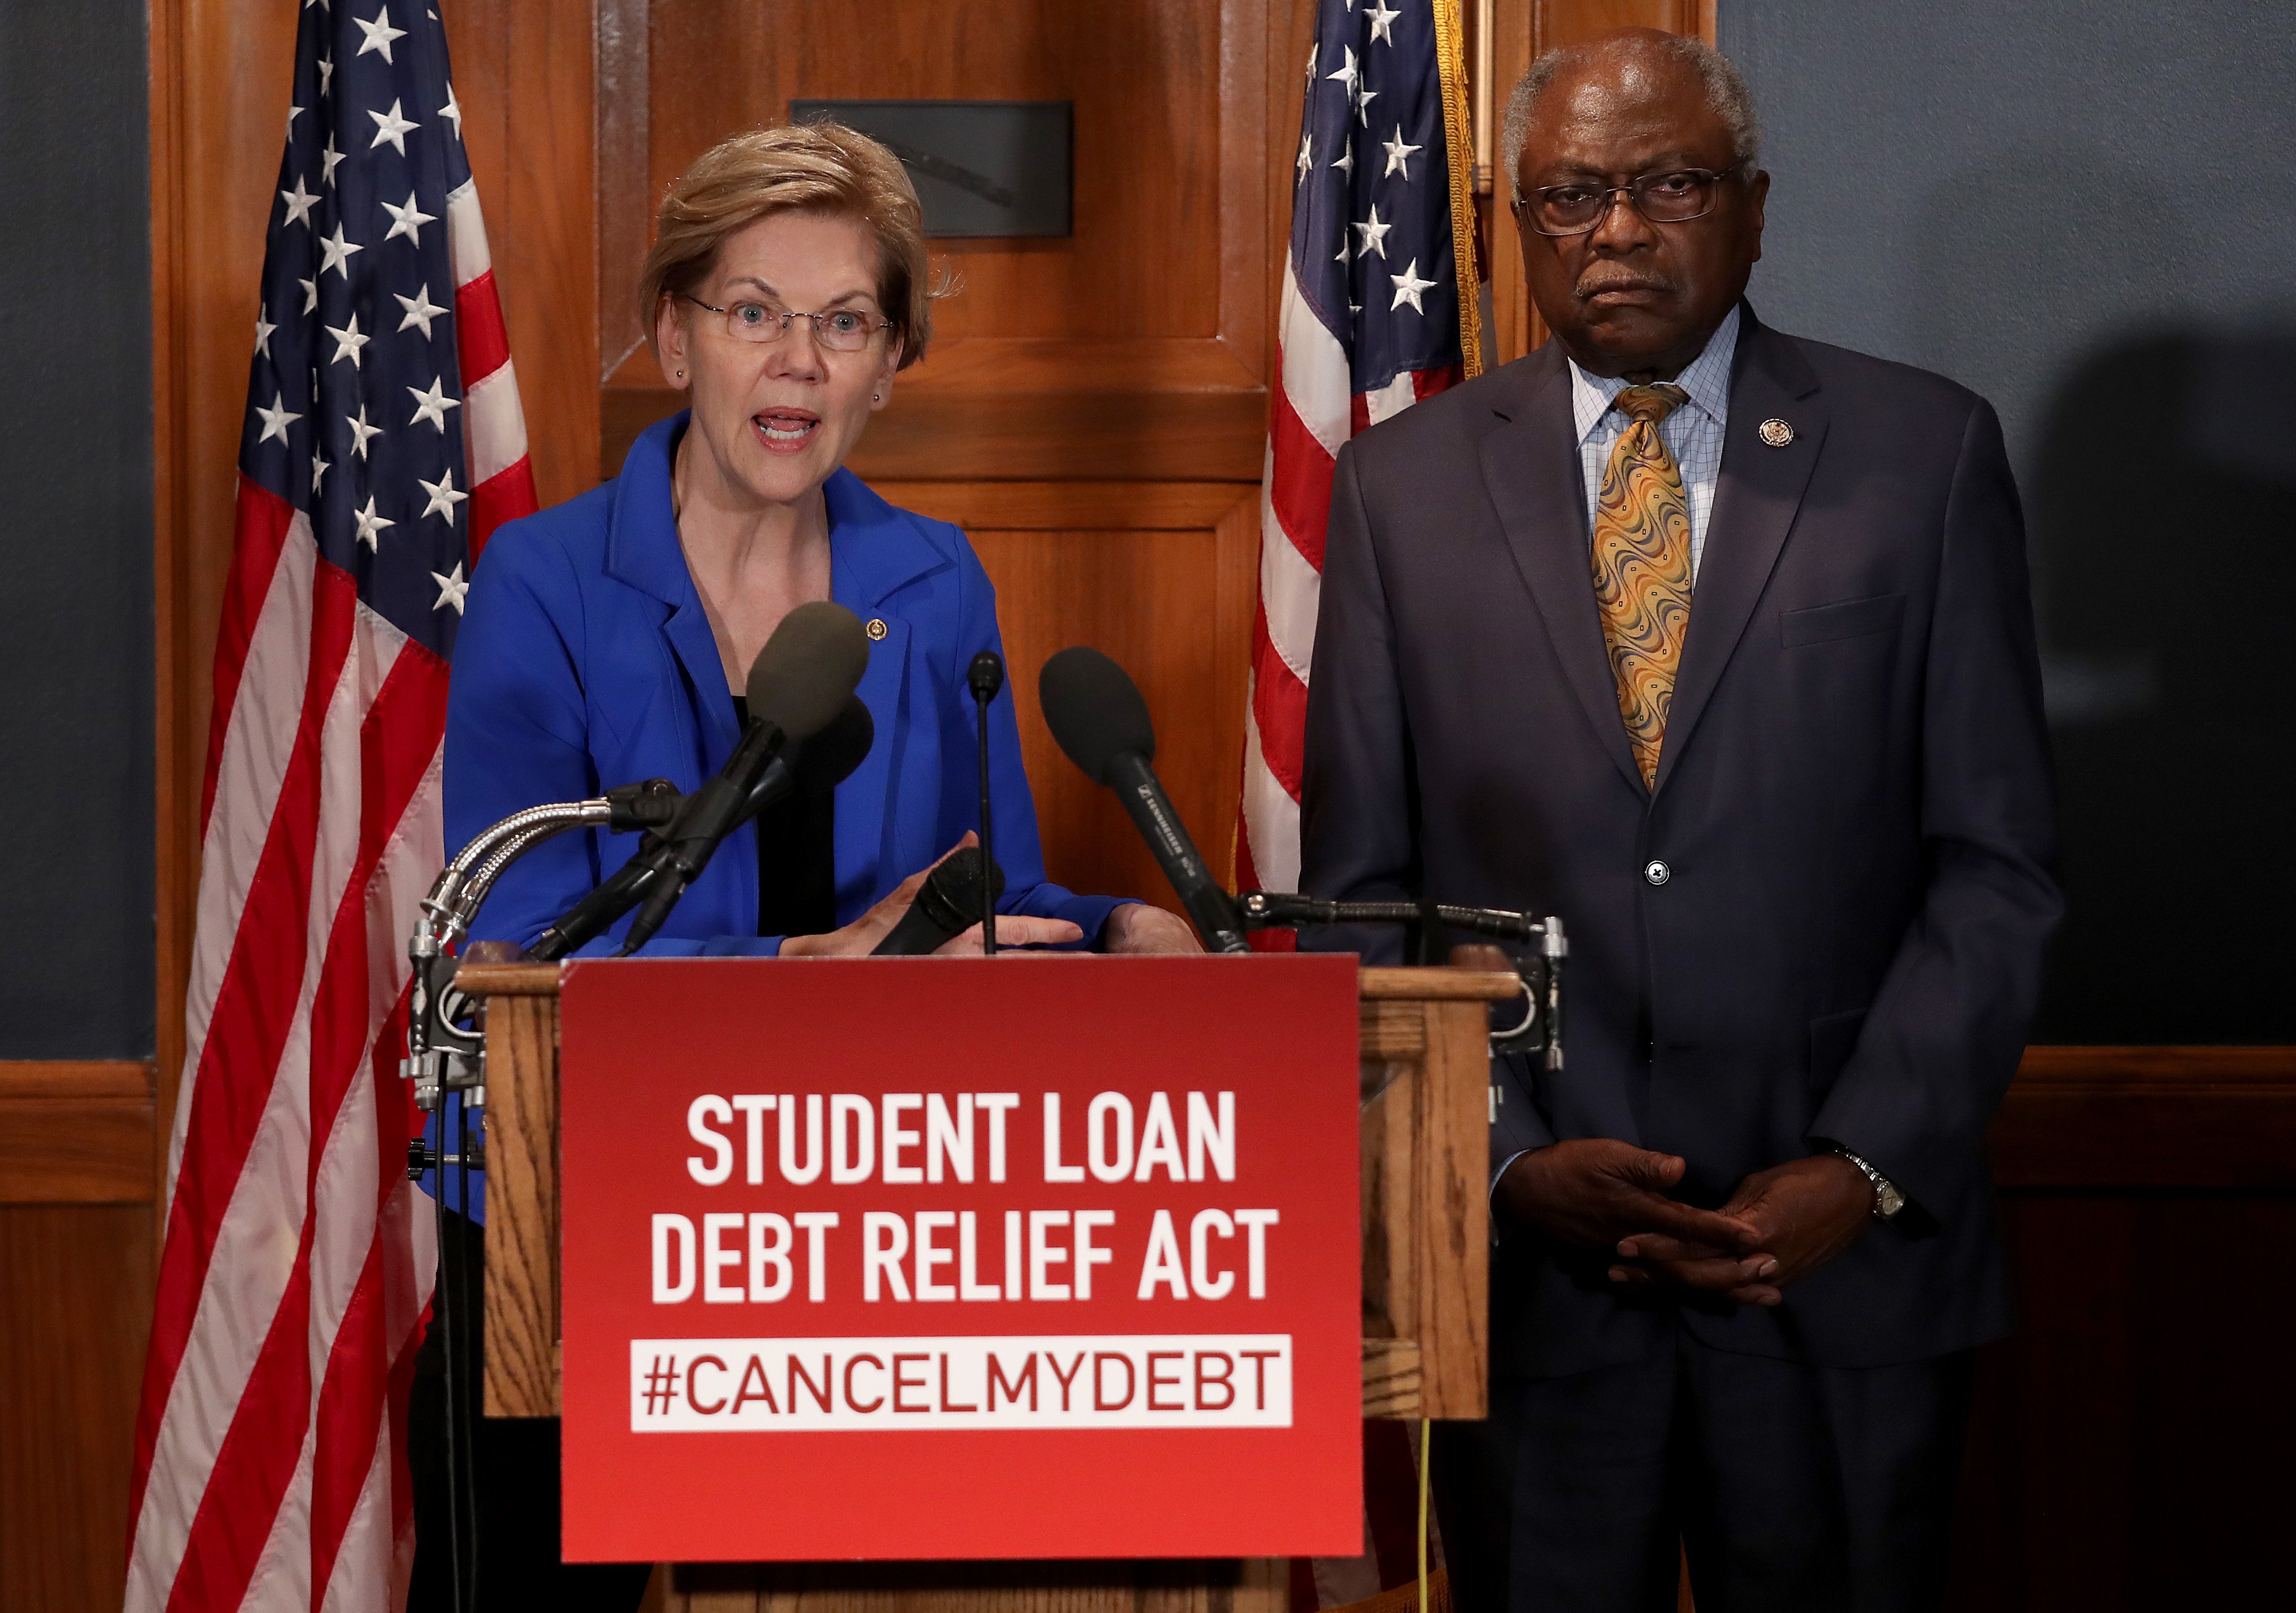 WASHINGTON, DC - JULY 23: Sen. Elizabeth Warren (D-MA) speaks during a press conference on Capitol Hill July 23, 2019 in Washington, DC. Warren spoke with Rep. Jim Clyburn (R) (D-SC) on legislation to cancel student loan debt for millions of Americans. (Win McNamee/Getty Images)